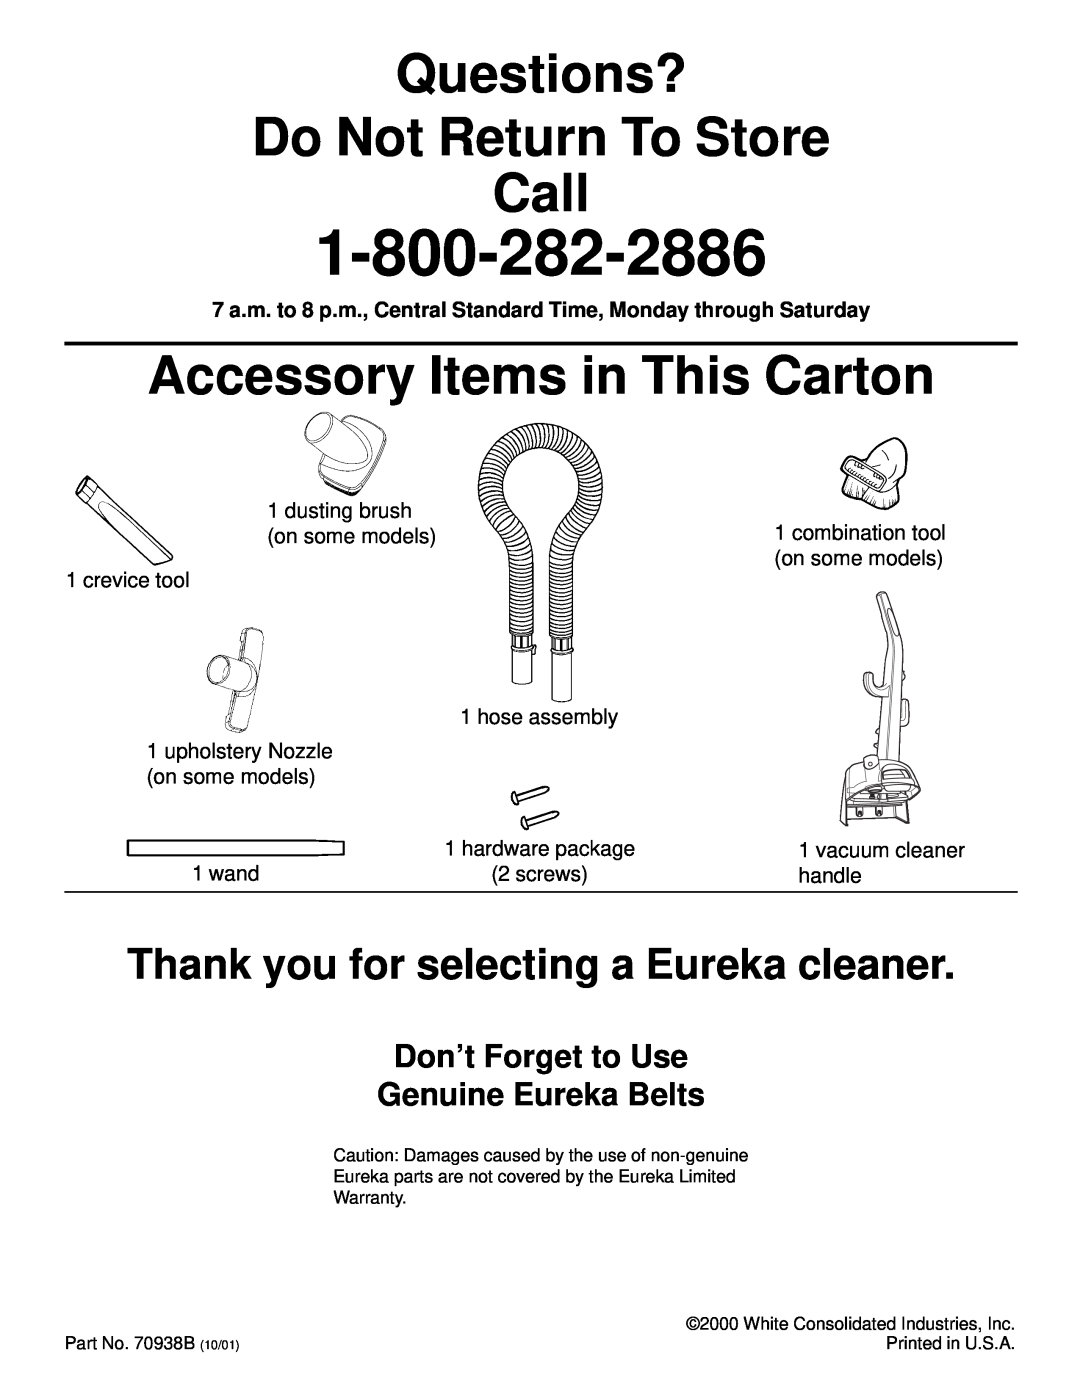 Eureka 4650 Questions? Do Not Return To Store Call, Accessory Items in This Carton, wand, hardware package, vacuum cleaner 